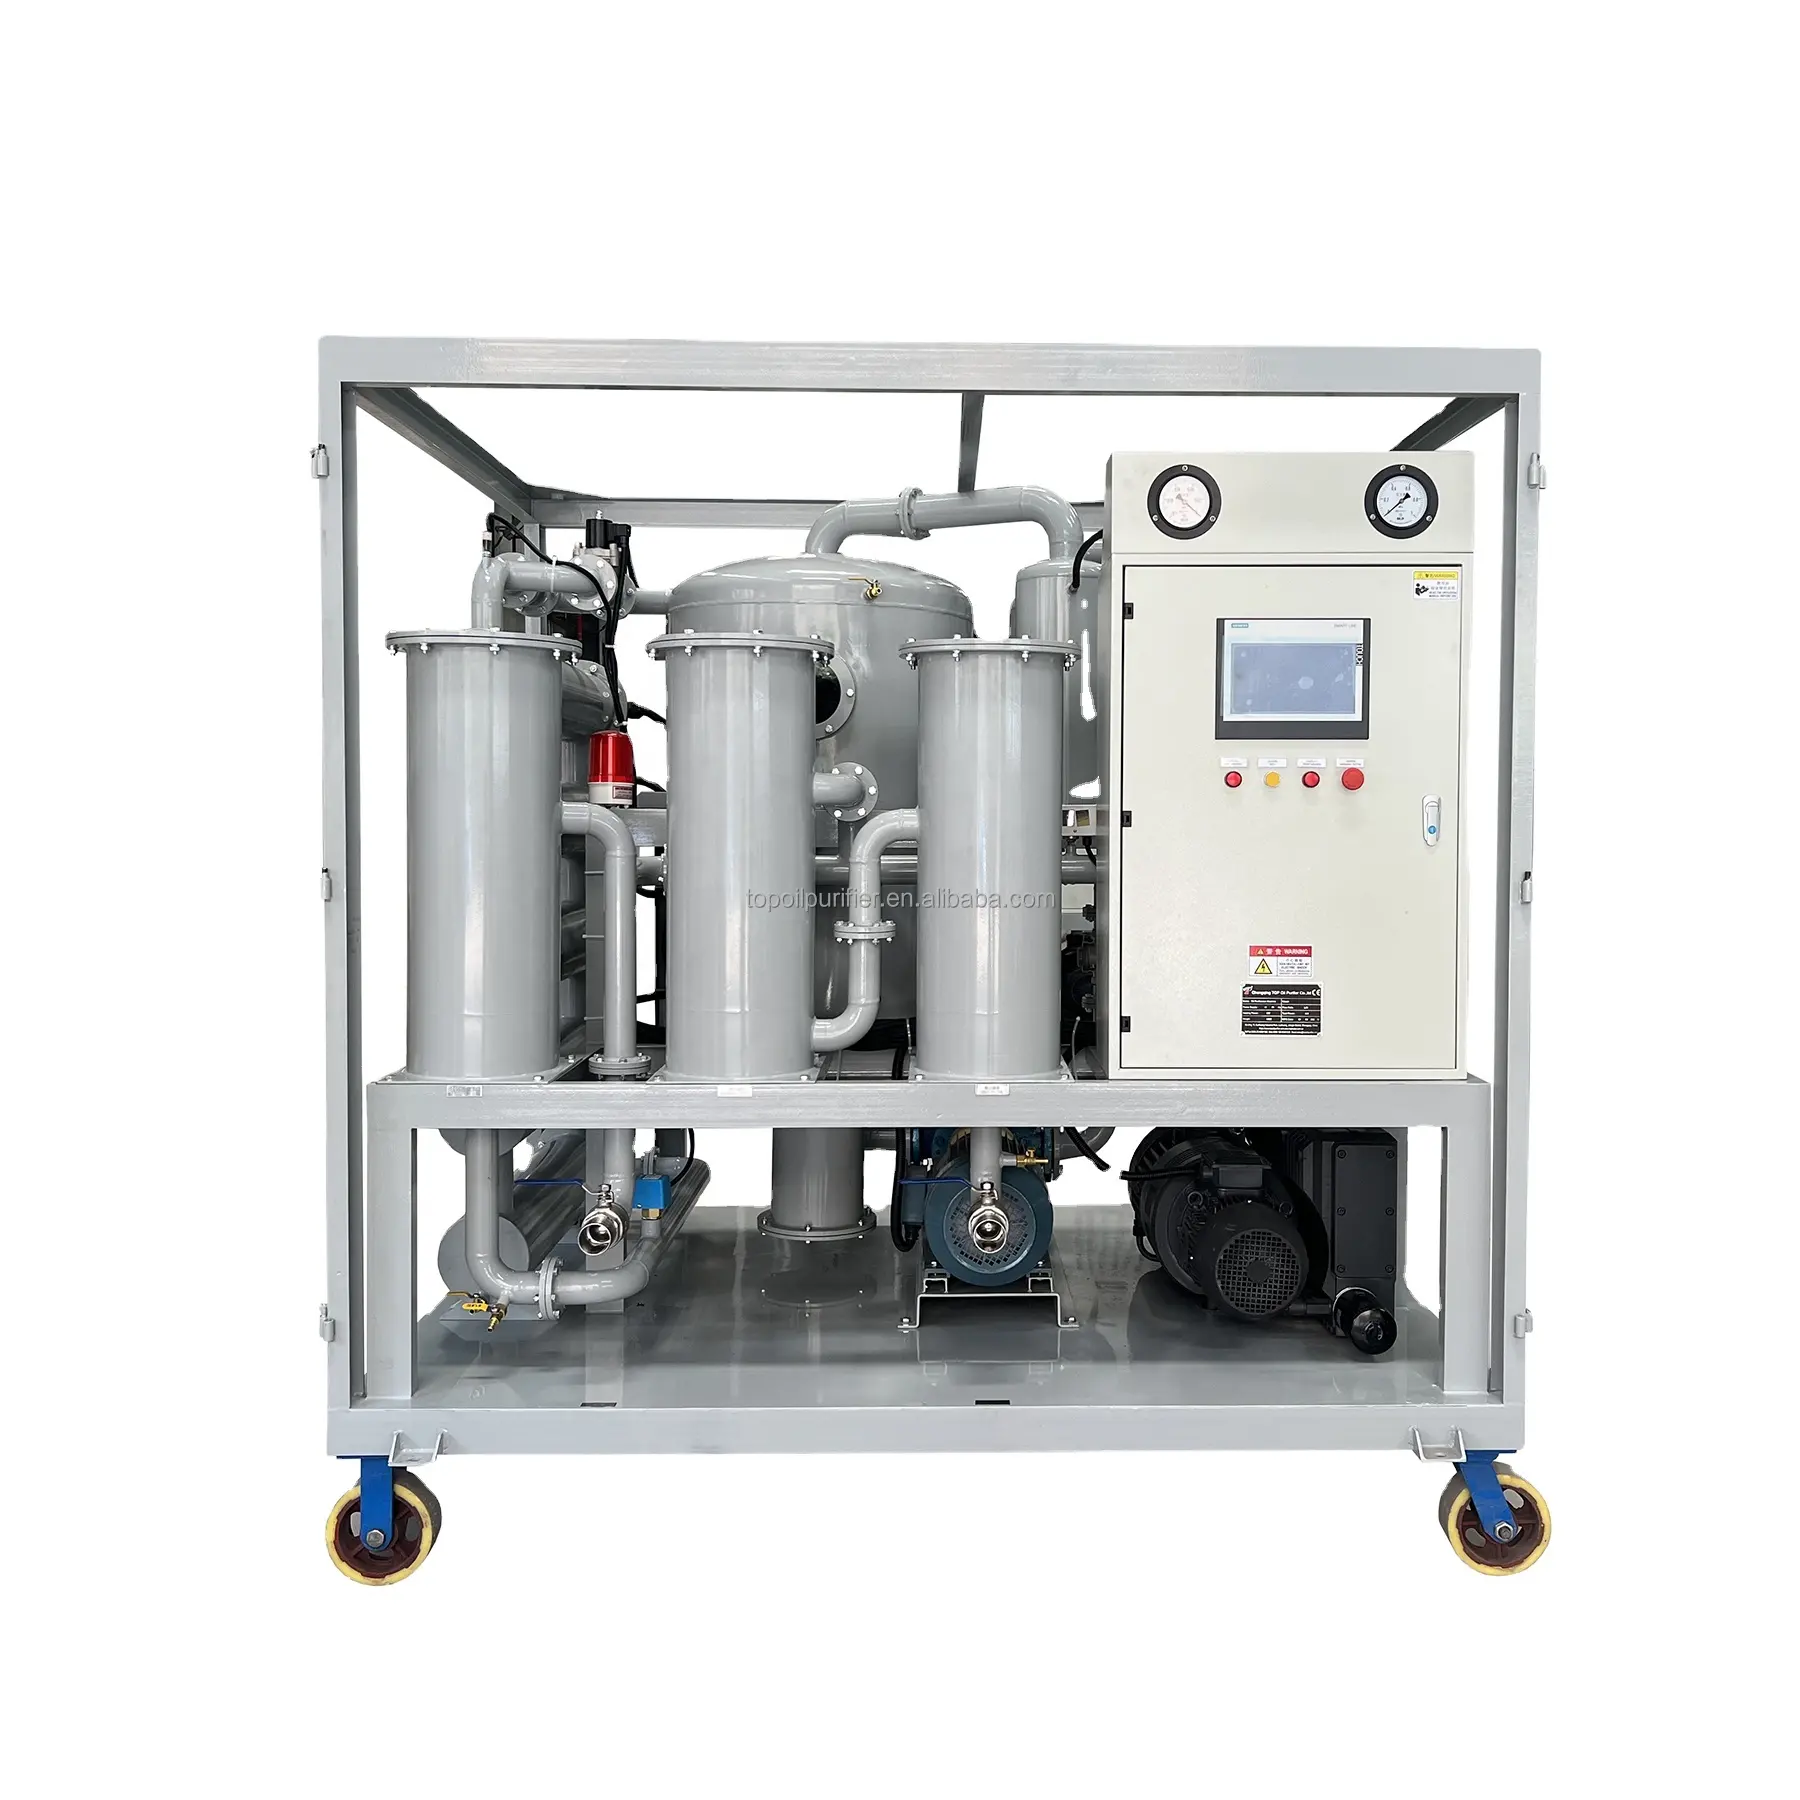 PLC Fully Automated Online Double-Stage Vacuum Transformer Oil Filtration Treatment for Power Station